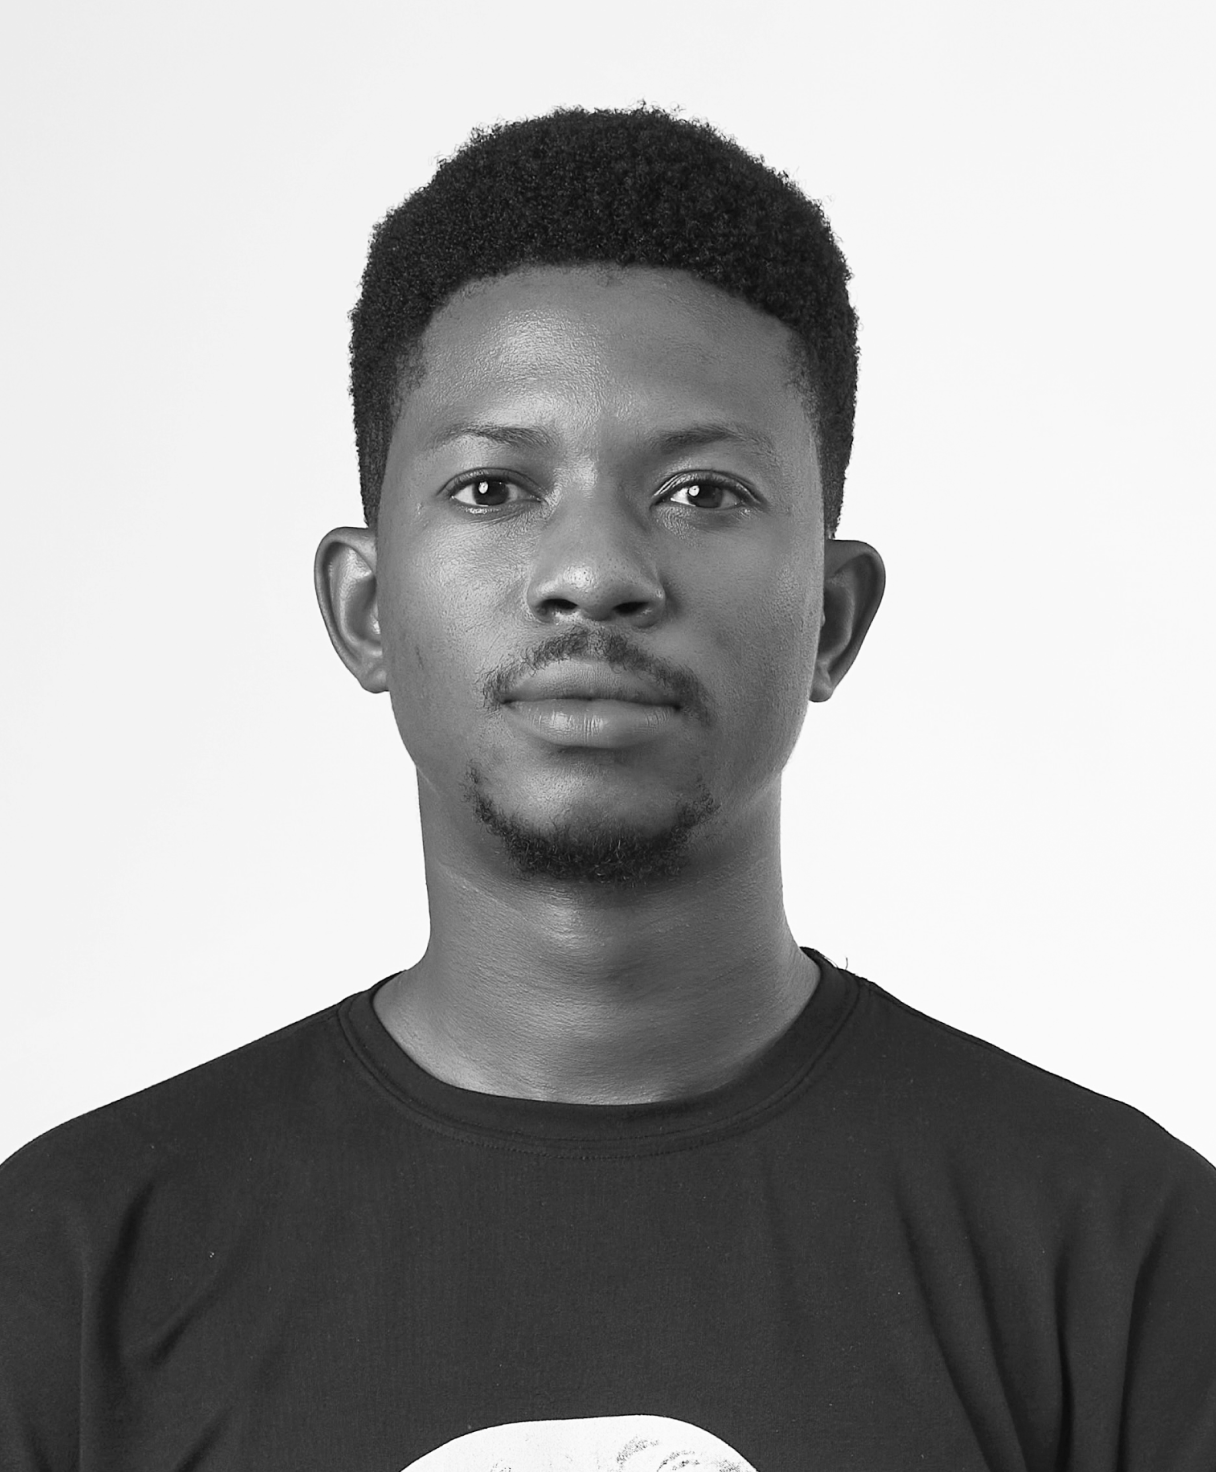 Black and white portrait of NNAMDI OPARA as part of the Oshinowo Studio team picture